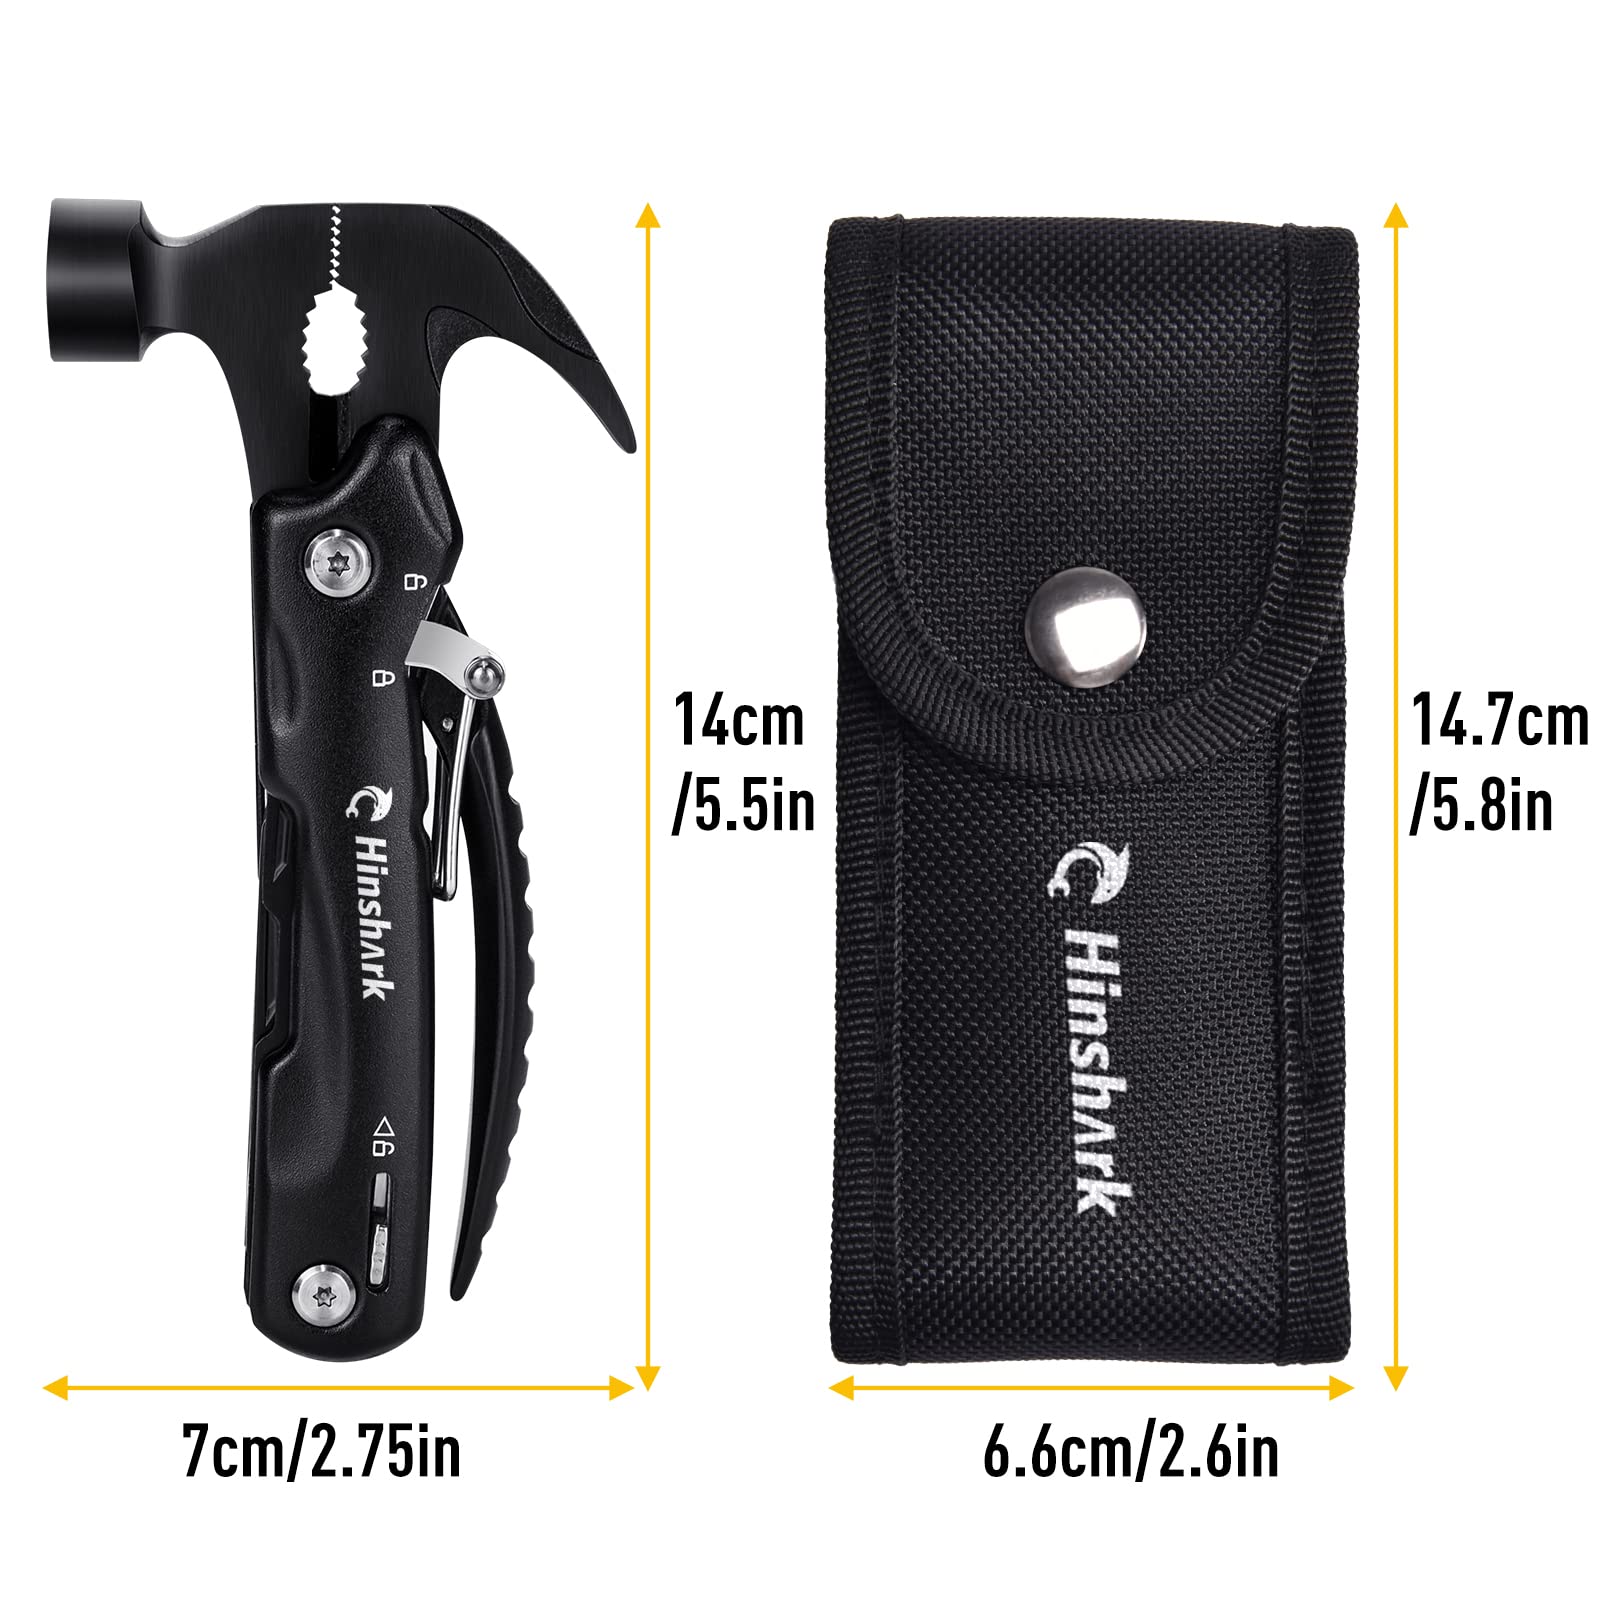 Hinshark Gifts for Men, Hammer Multitool Camping Accessories Cool Gadgets Tools for Men, Birthday Gifts for Him, Men, Dad, Boyfriend, Husband, Grandpa, Fathers Day Gift from Daughter